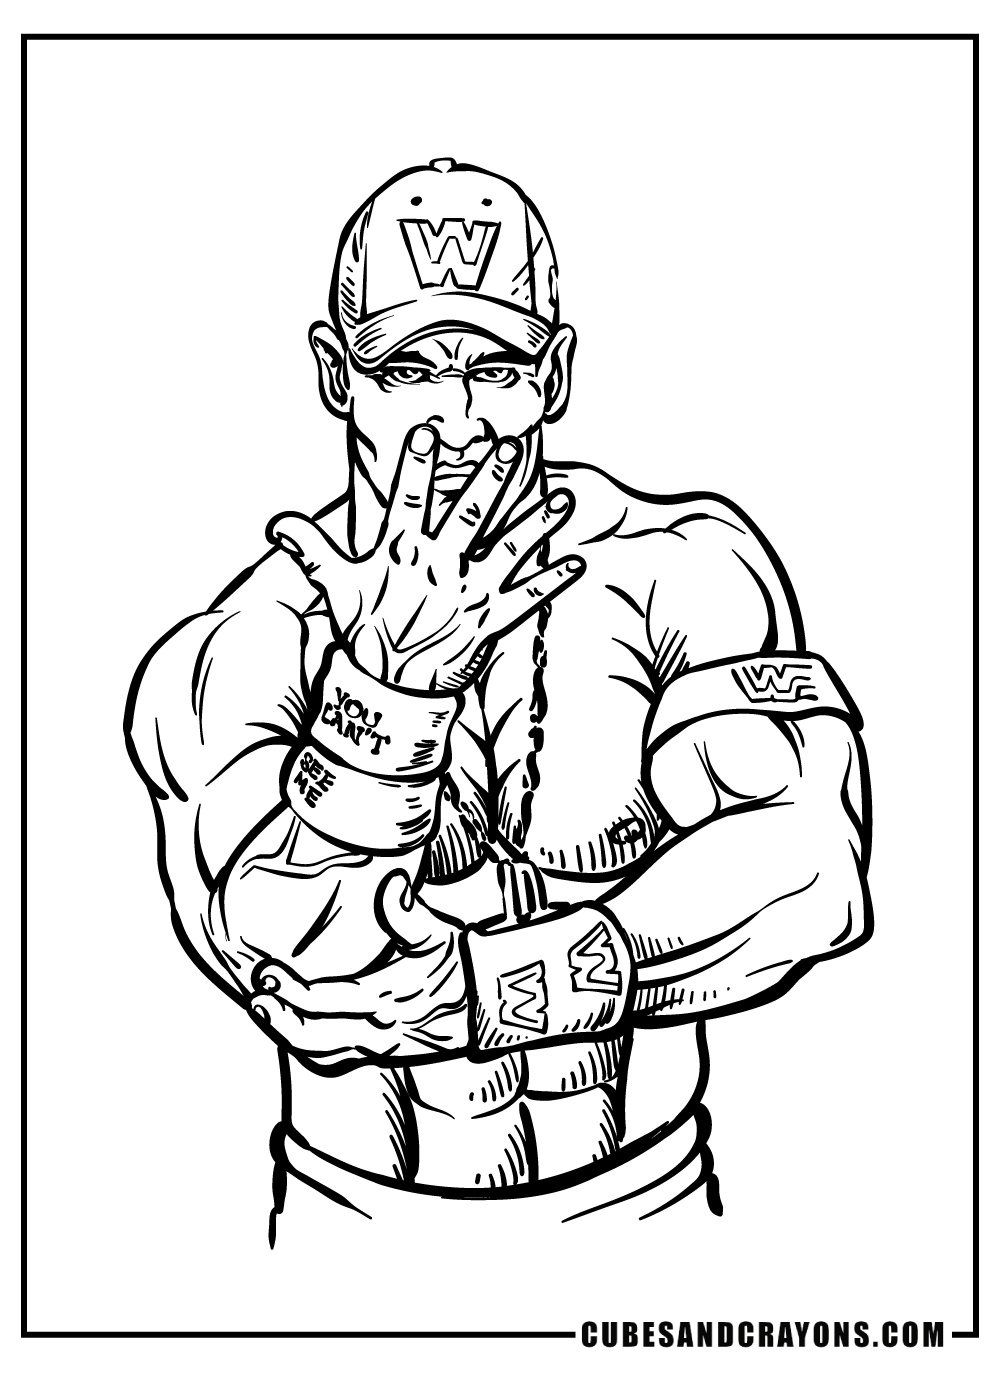 WWE Coloring Pages free pdf download